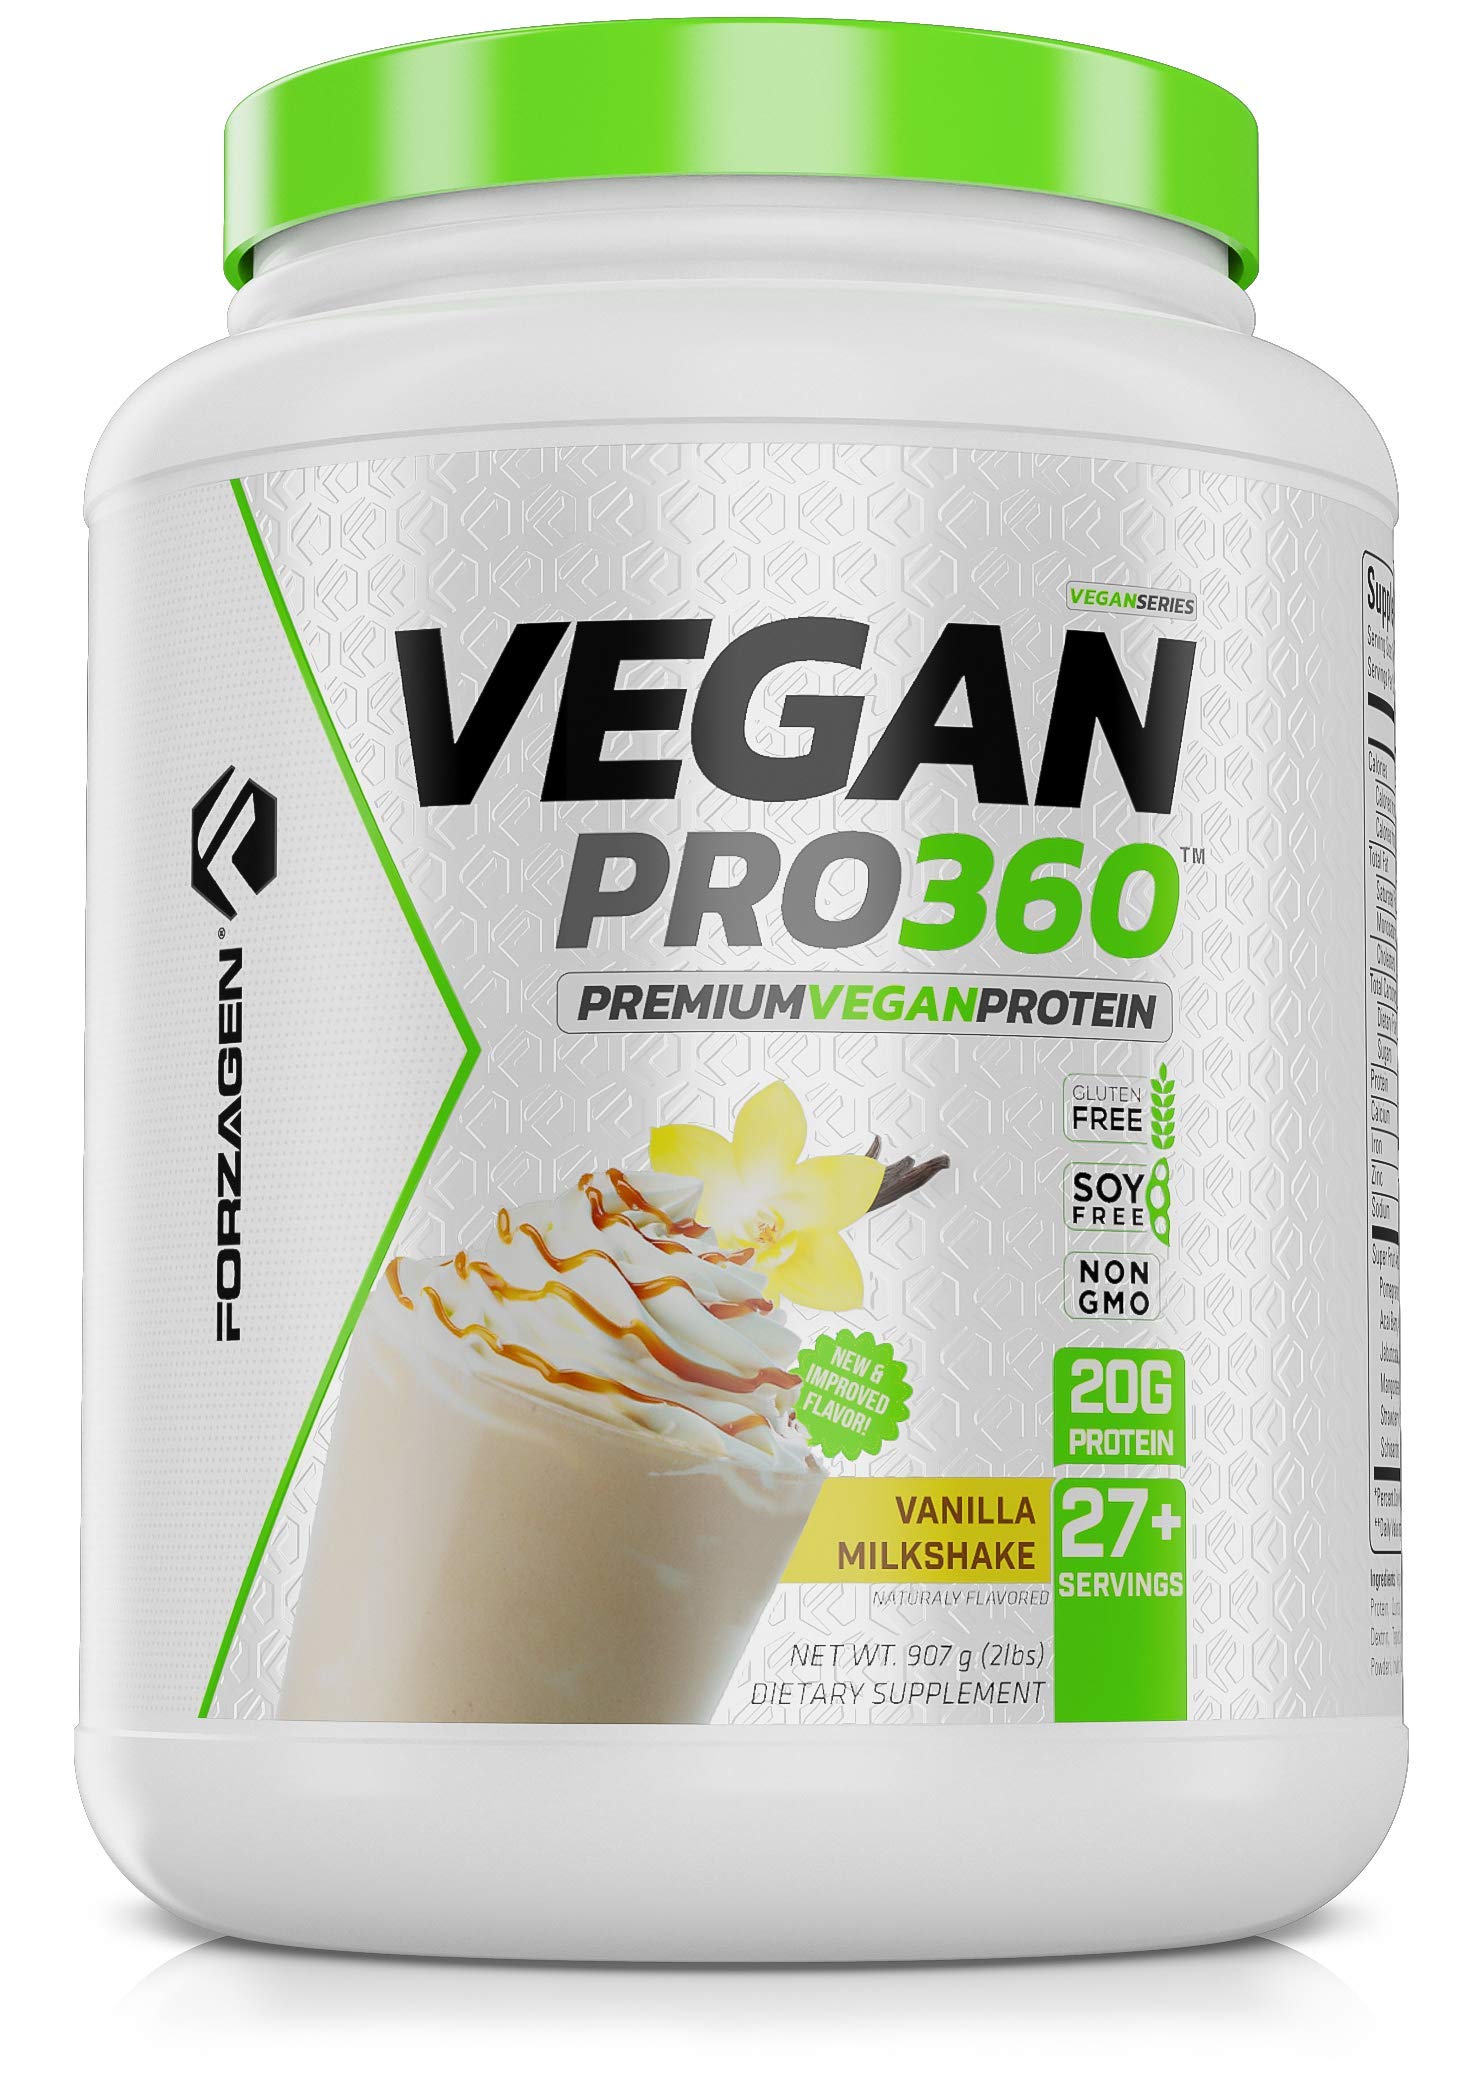 Book Cover Forzagen Vegan Protein 360 2 Lbs 27 Servings, Plant Based Protein Extracted from Quinoa, Brown Rice and Pea Isolate Protein, Dairy, Soy and Gluten Free, Nom GMO (Vanilla Milkshake)